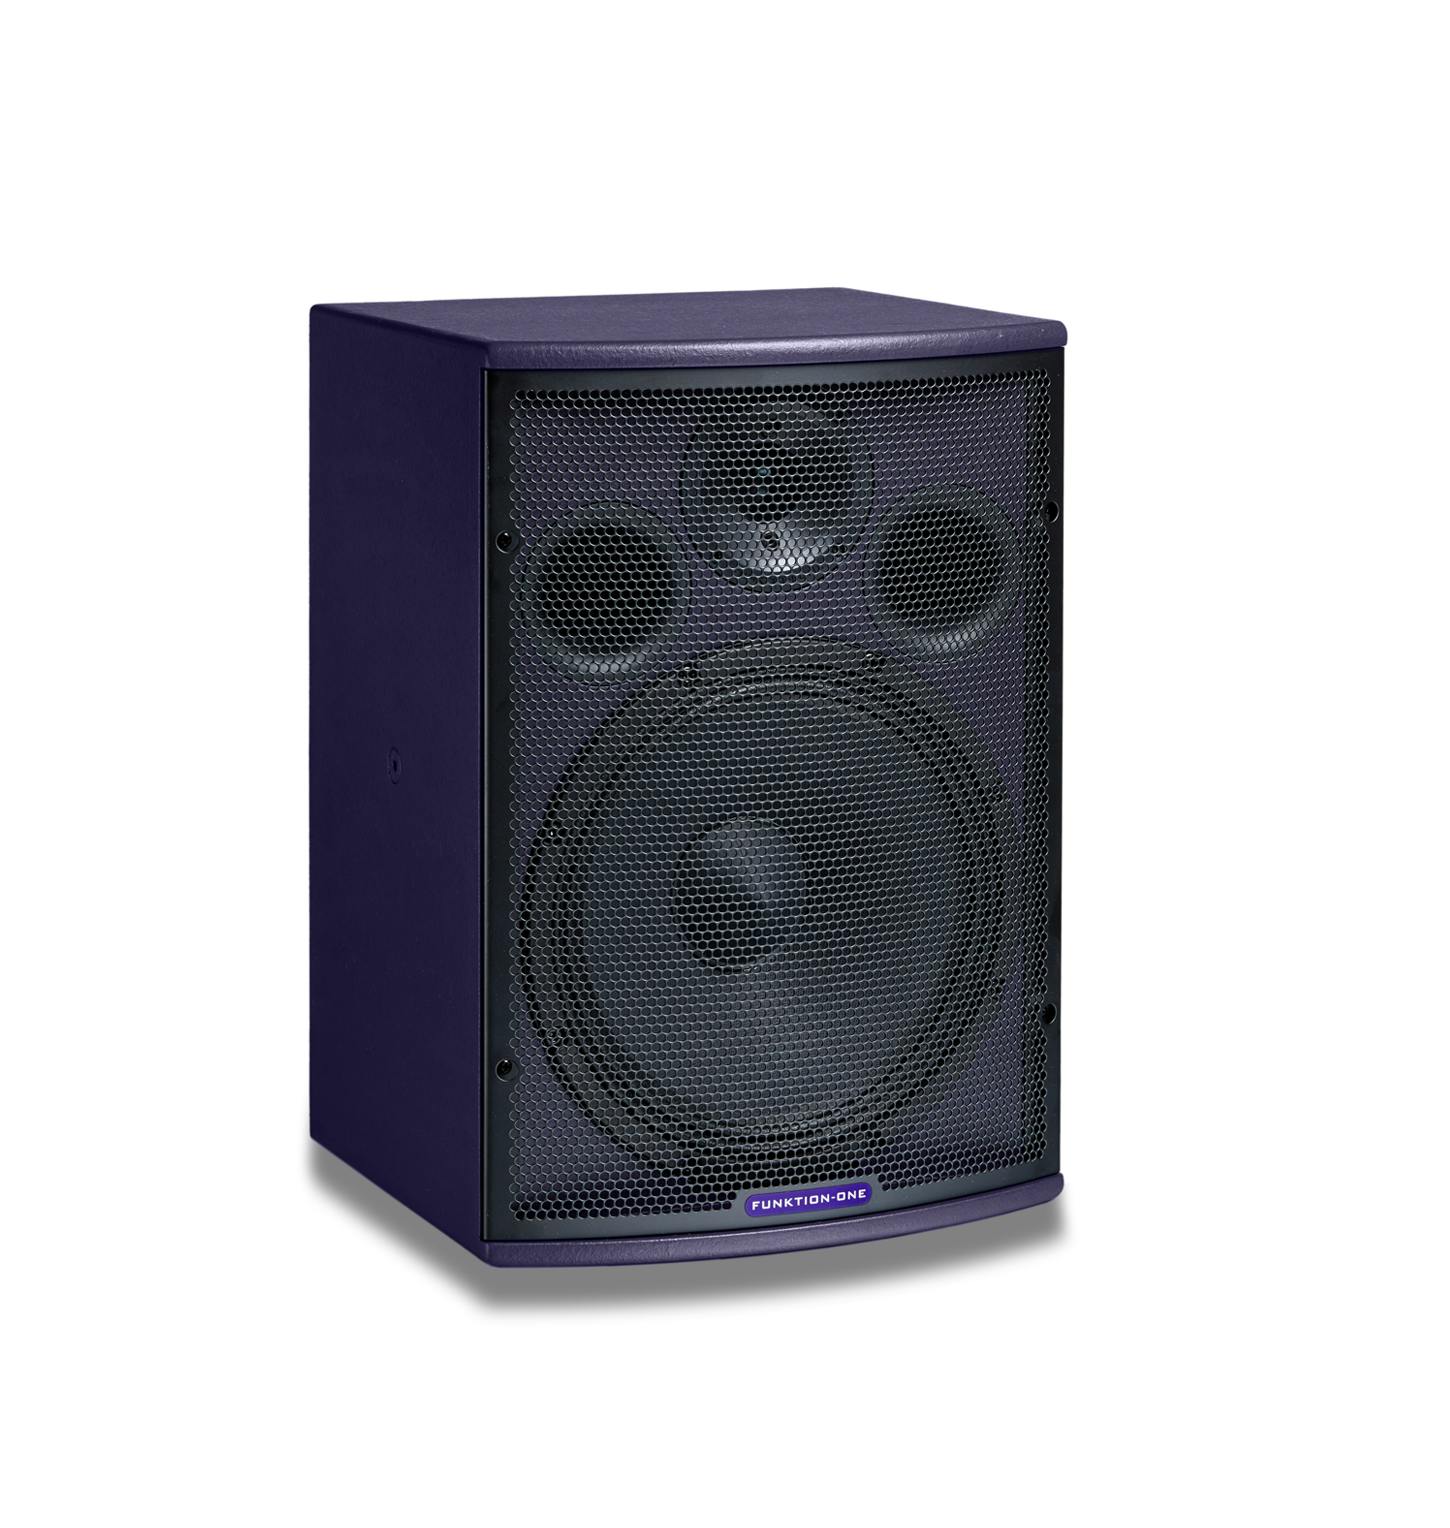 Religieus landheer Fauteuil Funktion-One Loudspeakers - Engineered for Sonic Excellence